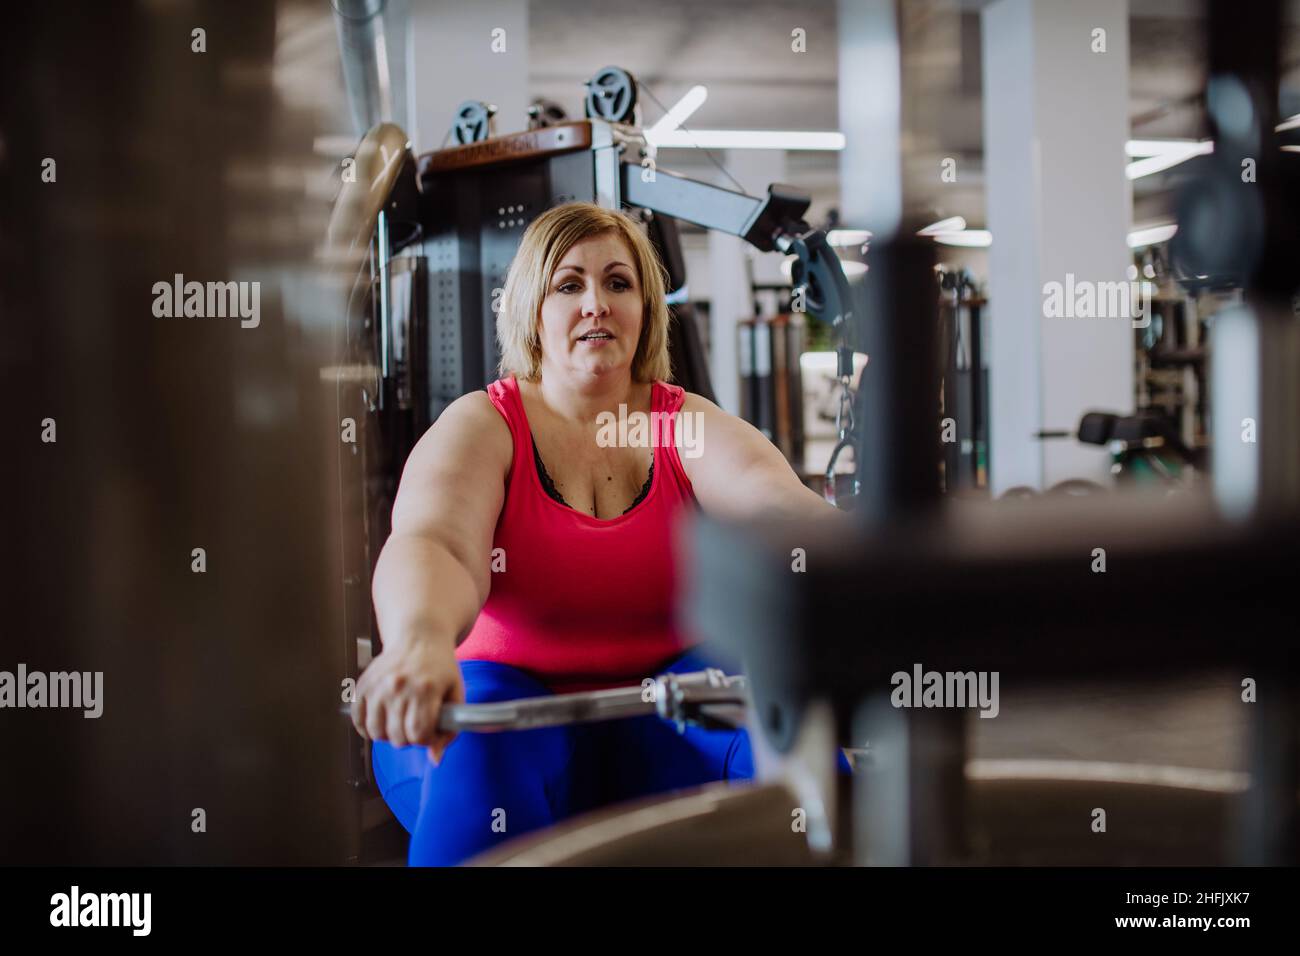 Plus size woman training on rowing machine indoors in gym Stock Photo